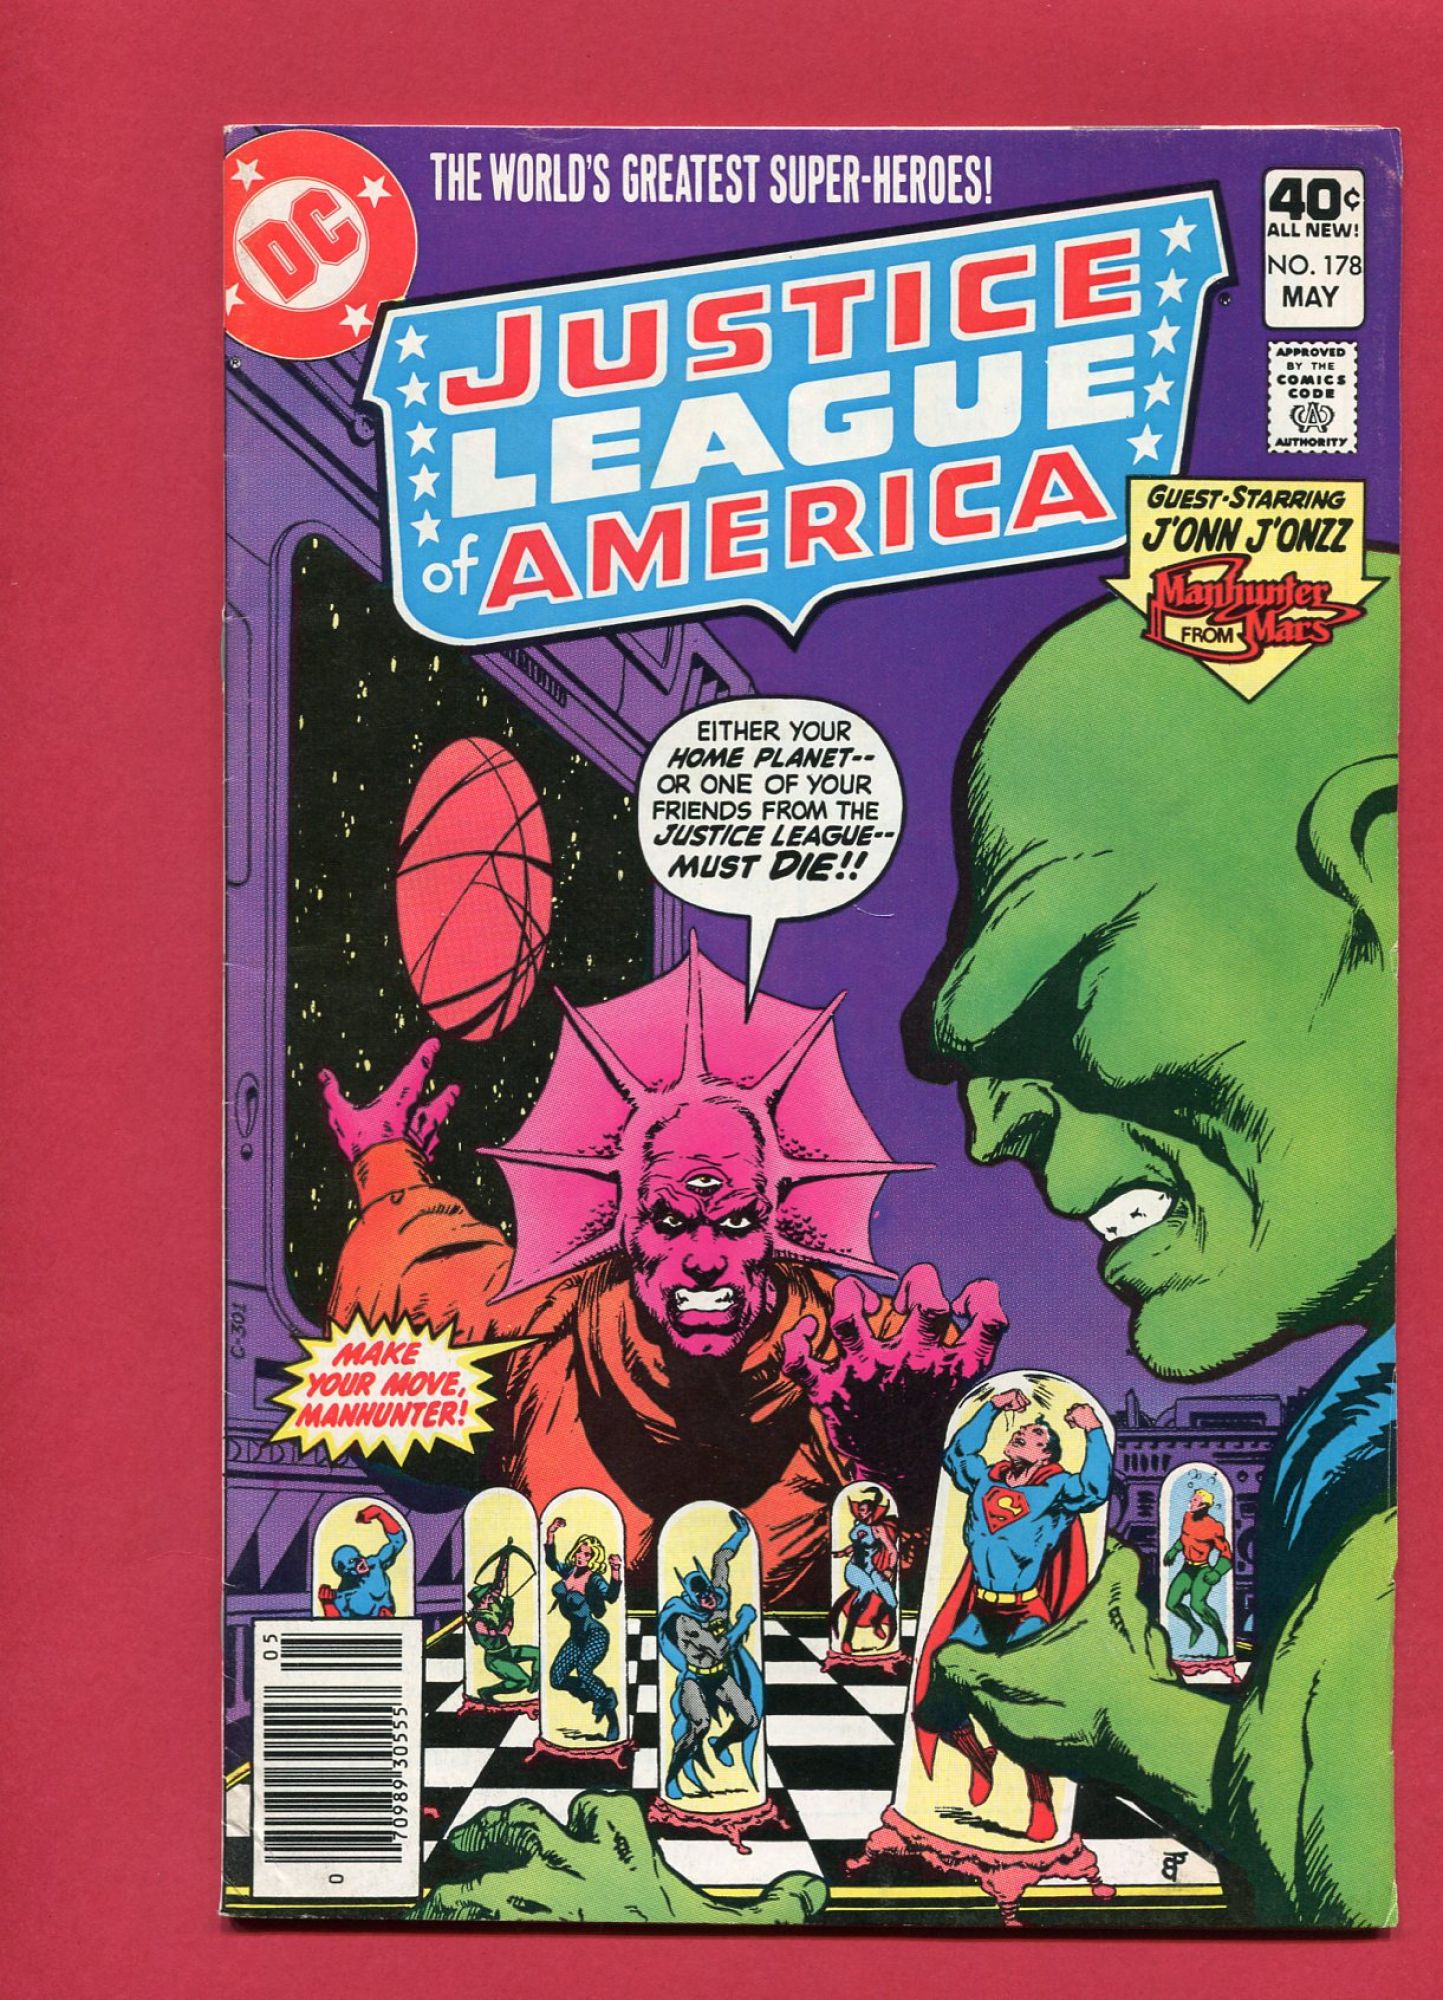 Justice League of America #178, May 1980, 7.0 FN/VF